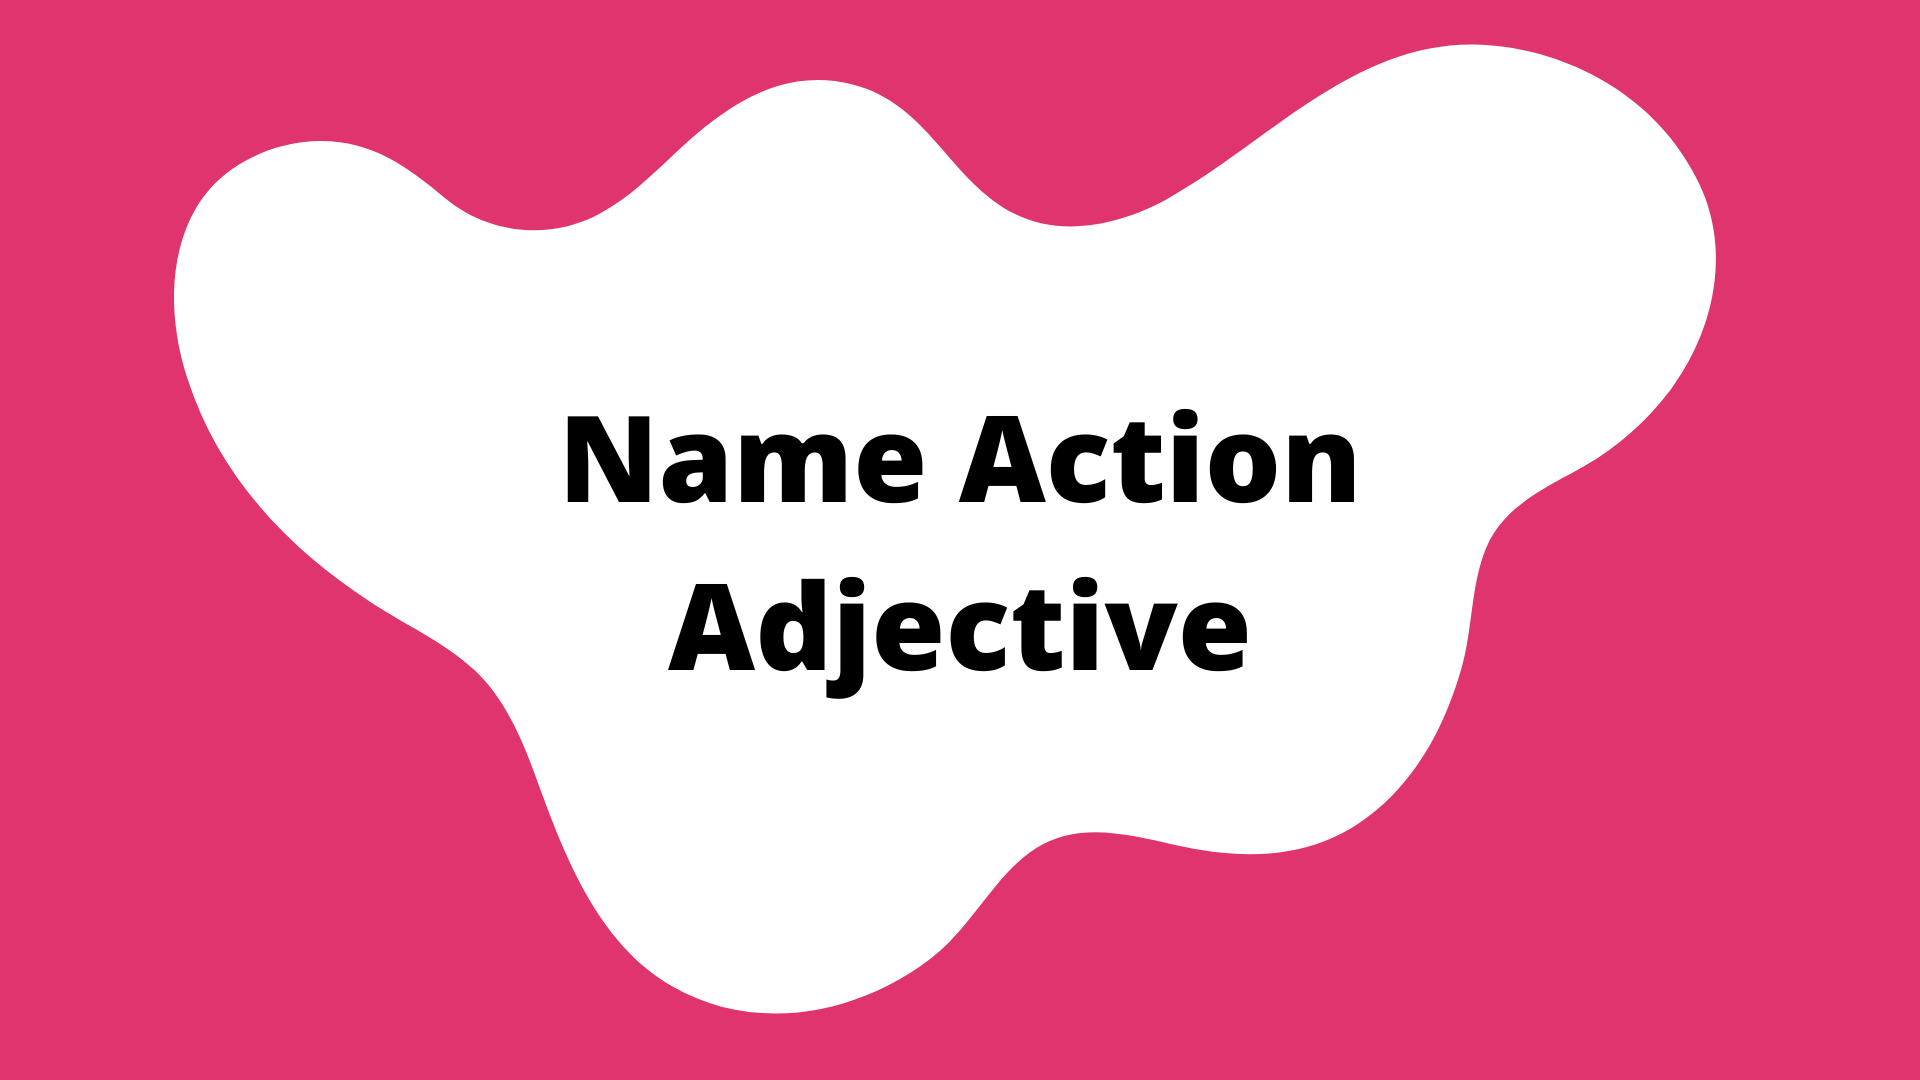 Name Action Adjective